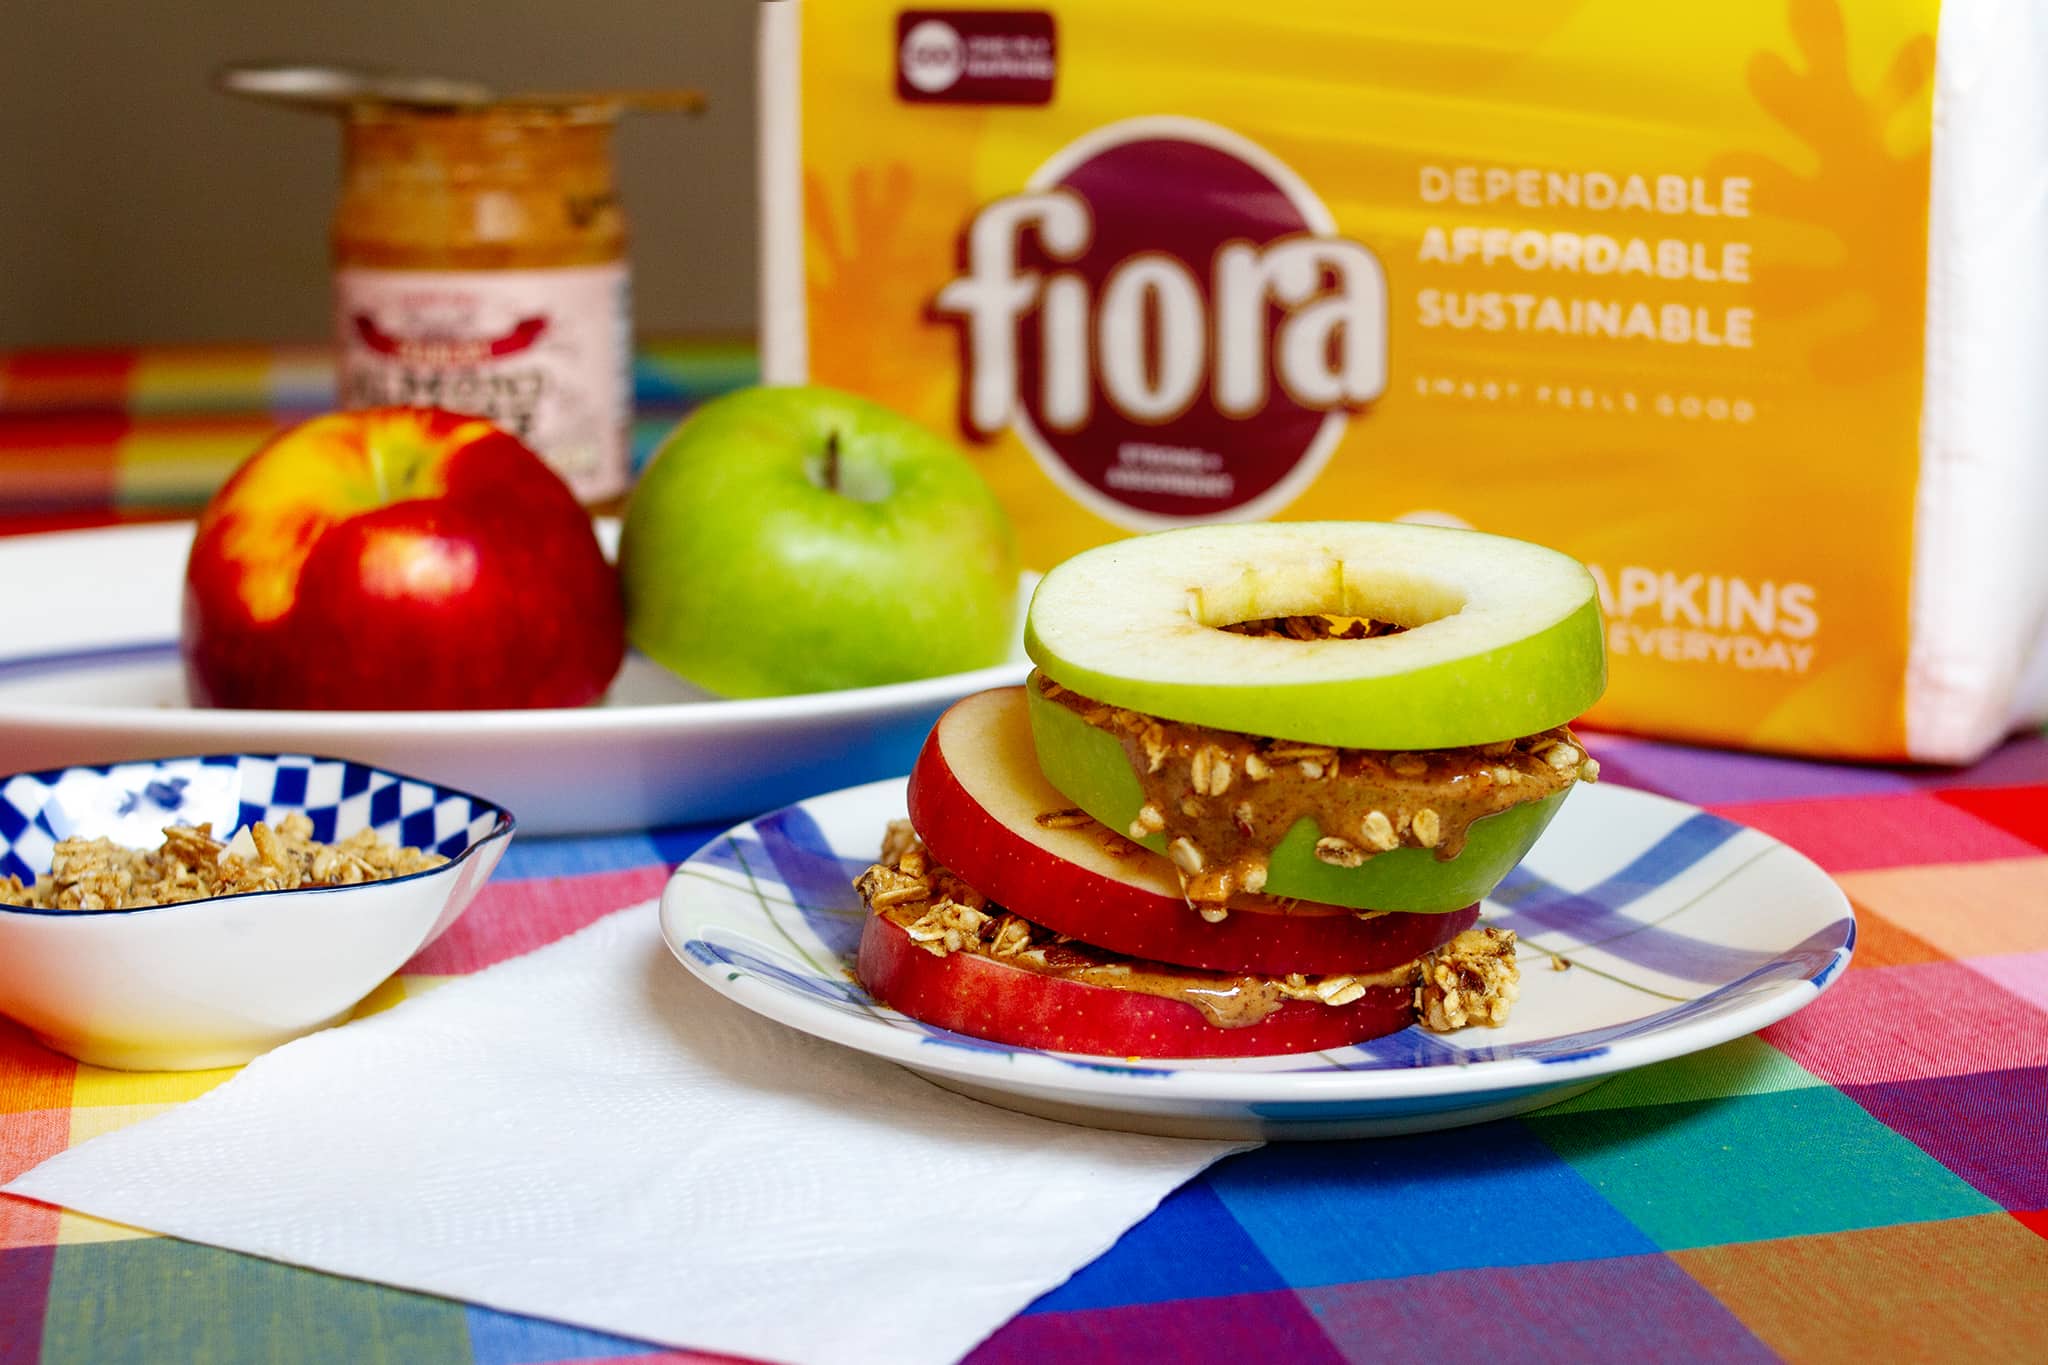 Apple and PB sandwich (with oats!)